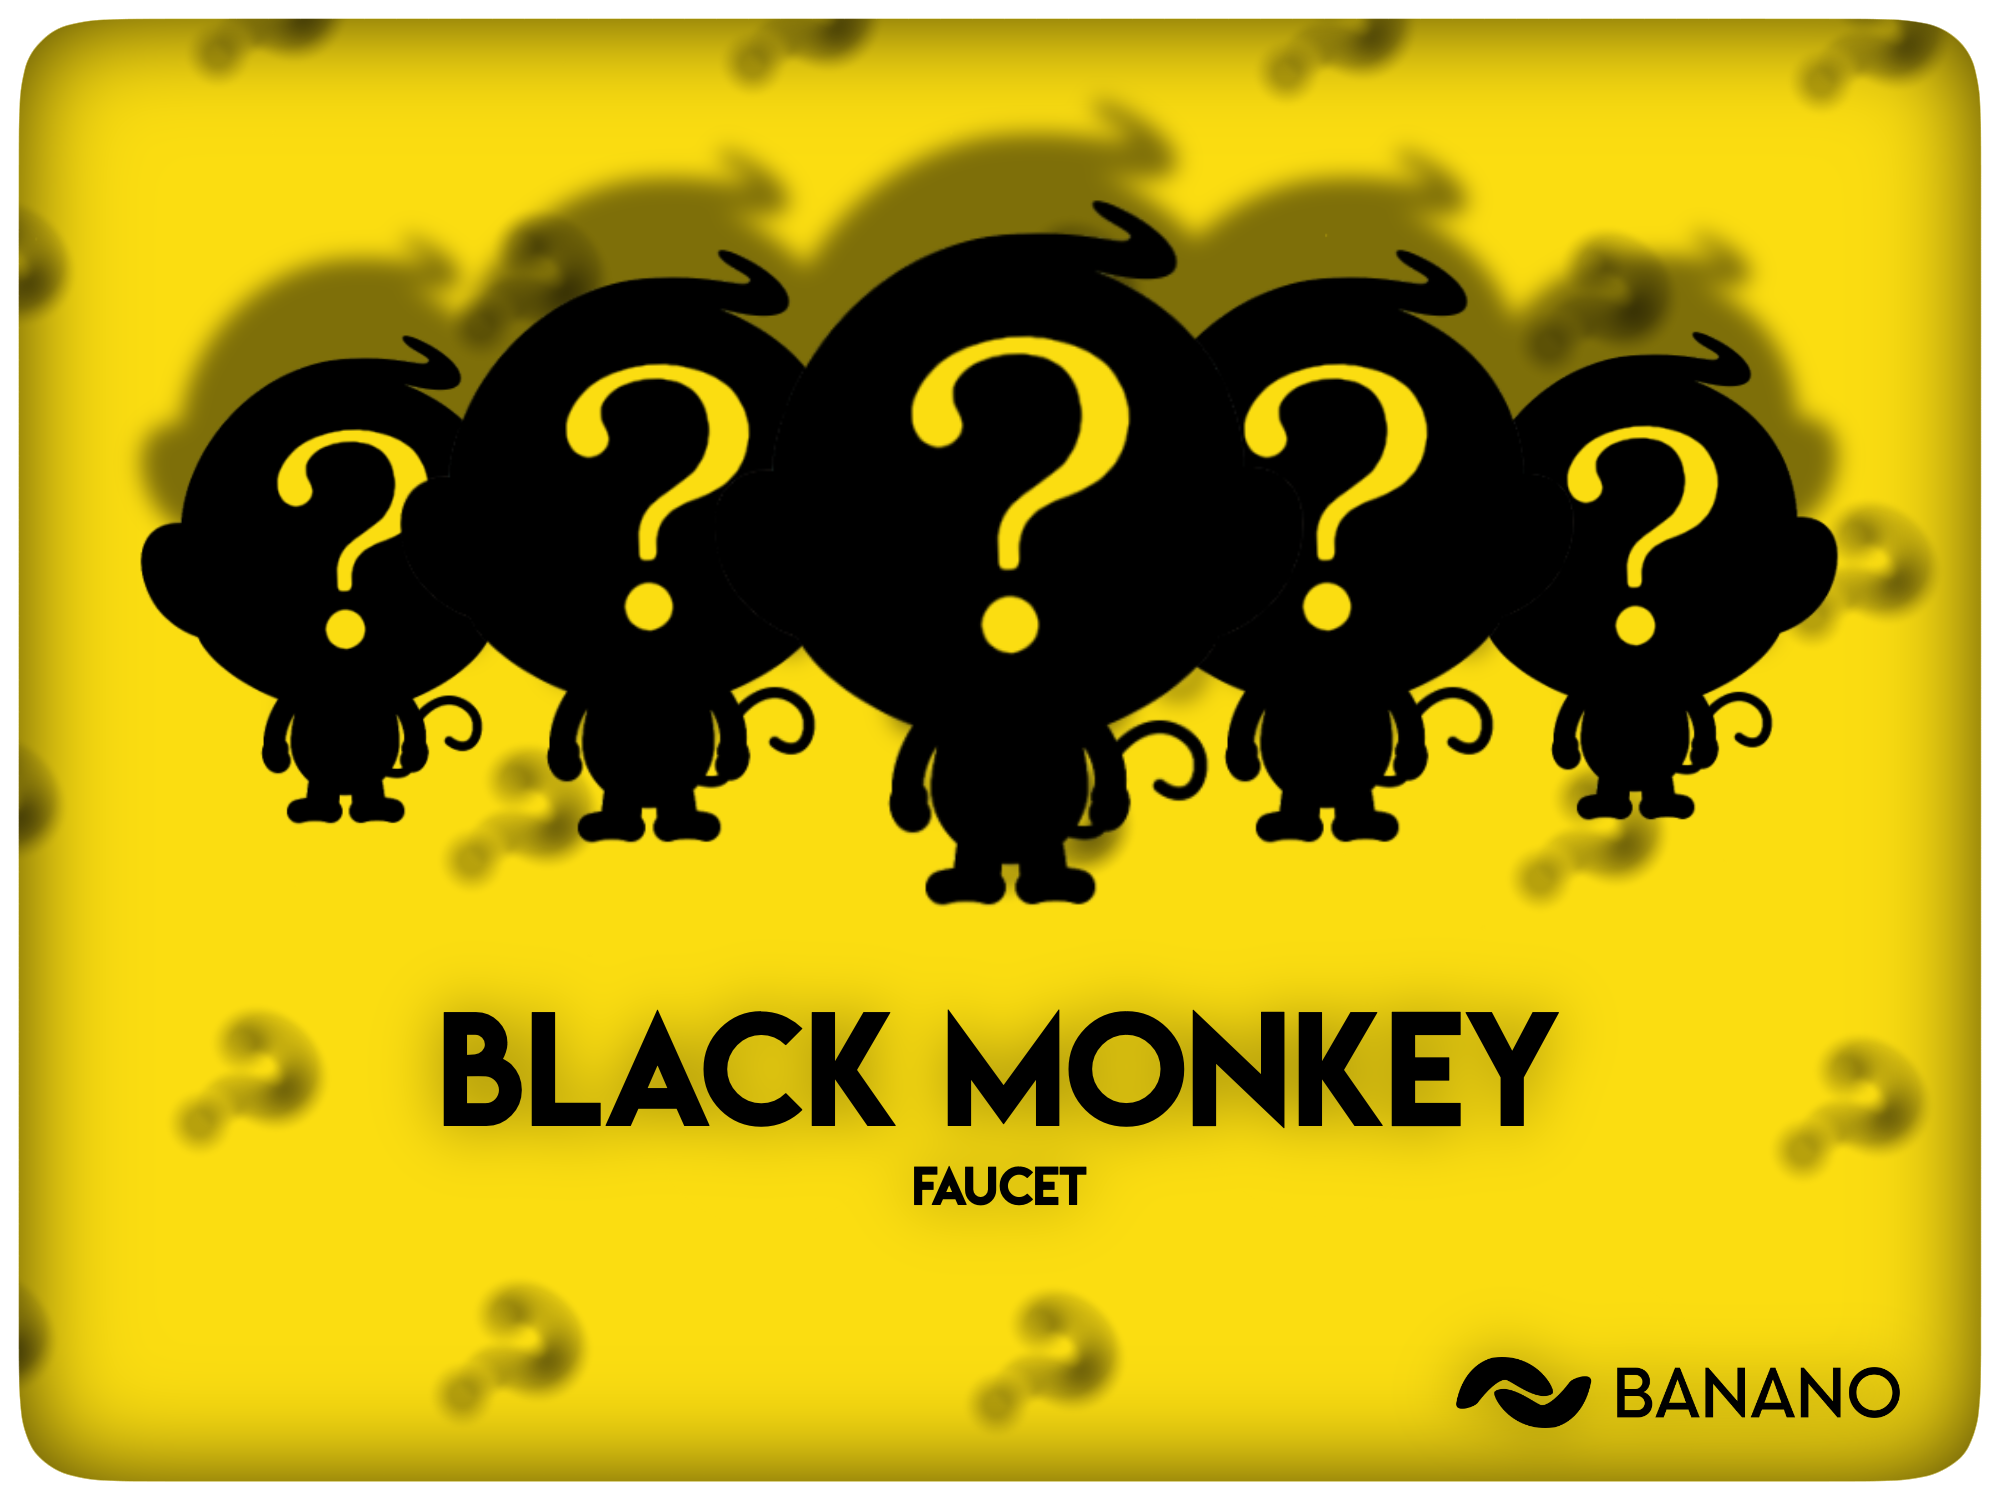 Get Free Crypto for Playing ‘Black Monkey’ — BANANO’s Popular Faucet Game! 24 Hours Only!